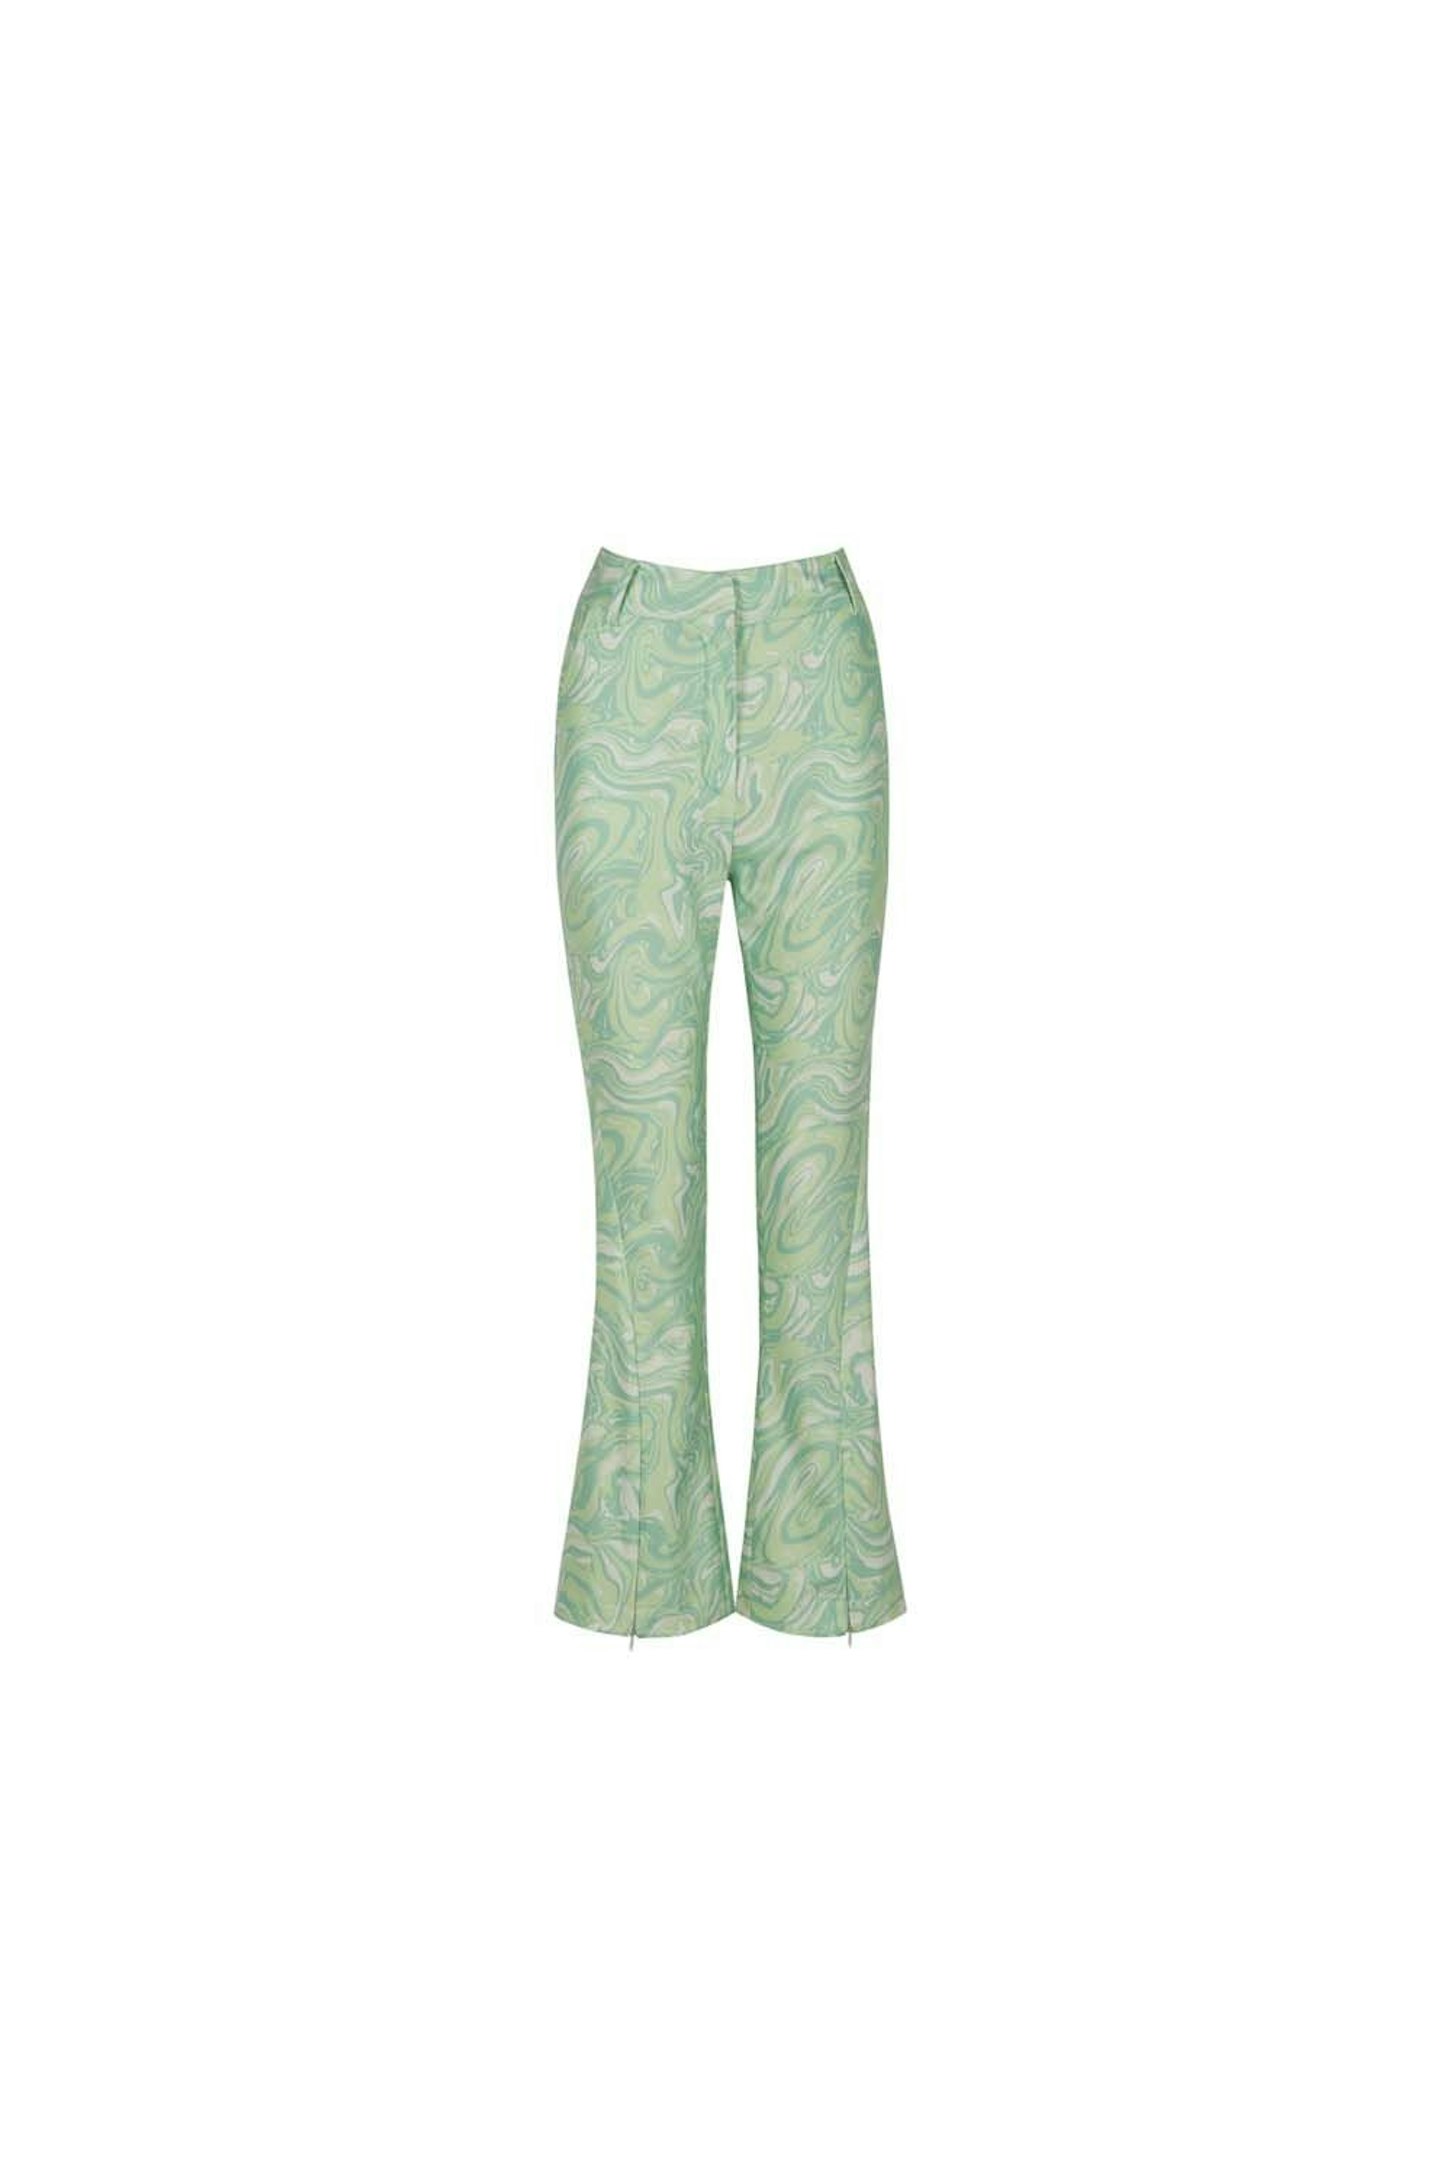 House Of Sunny, Paradise Party Pant, £85